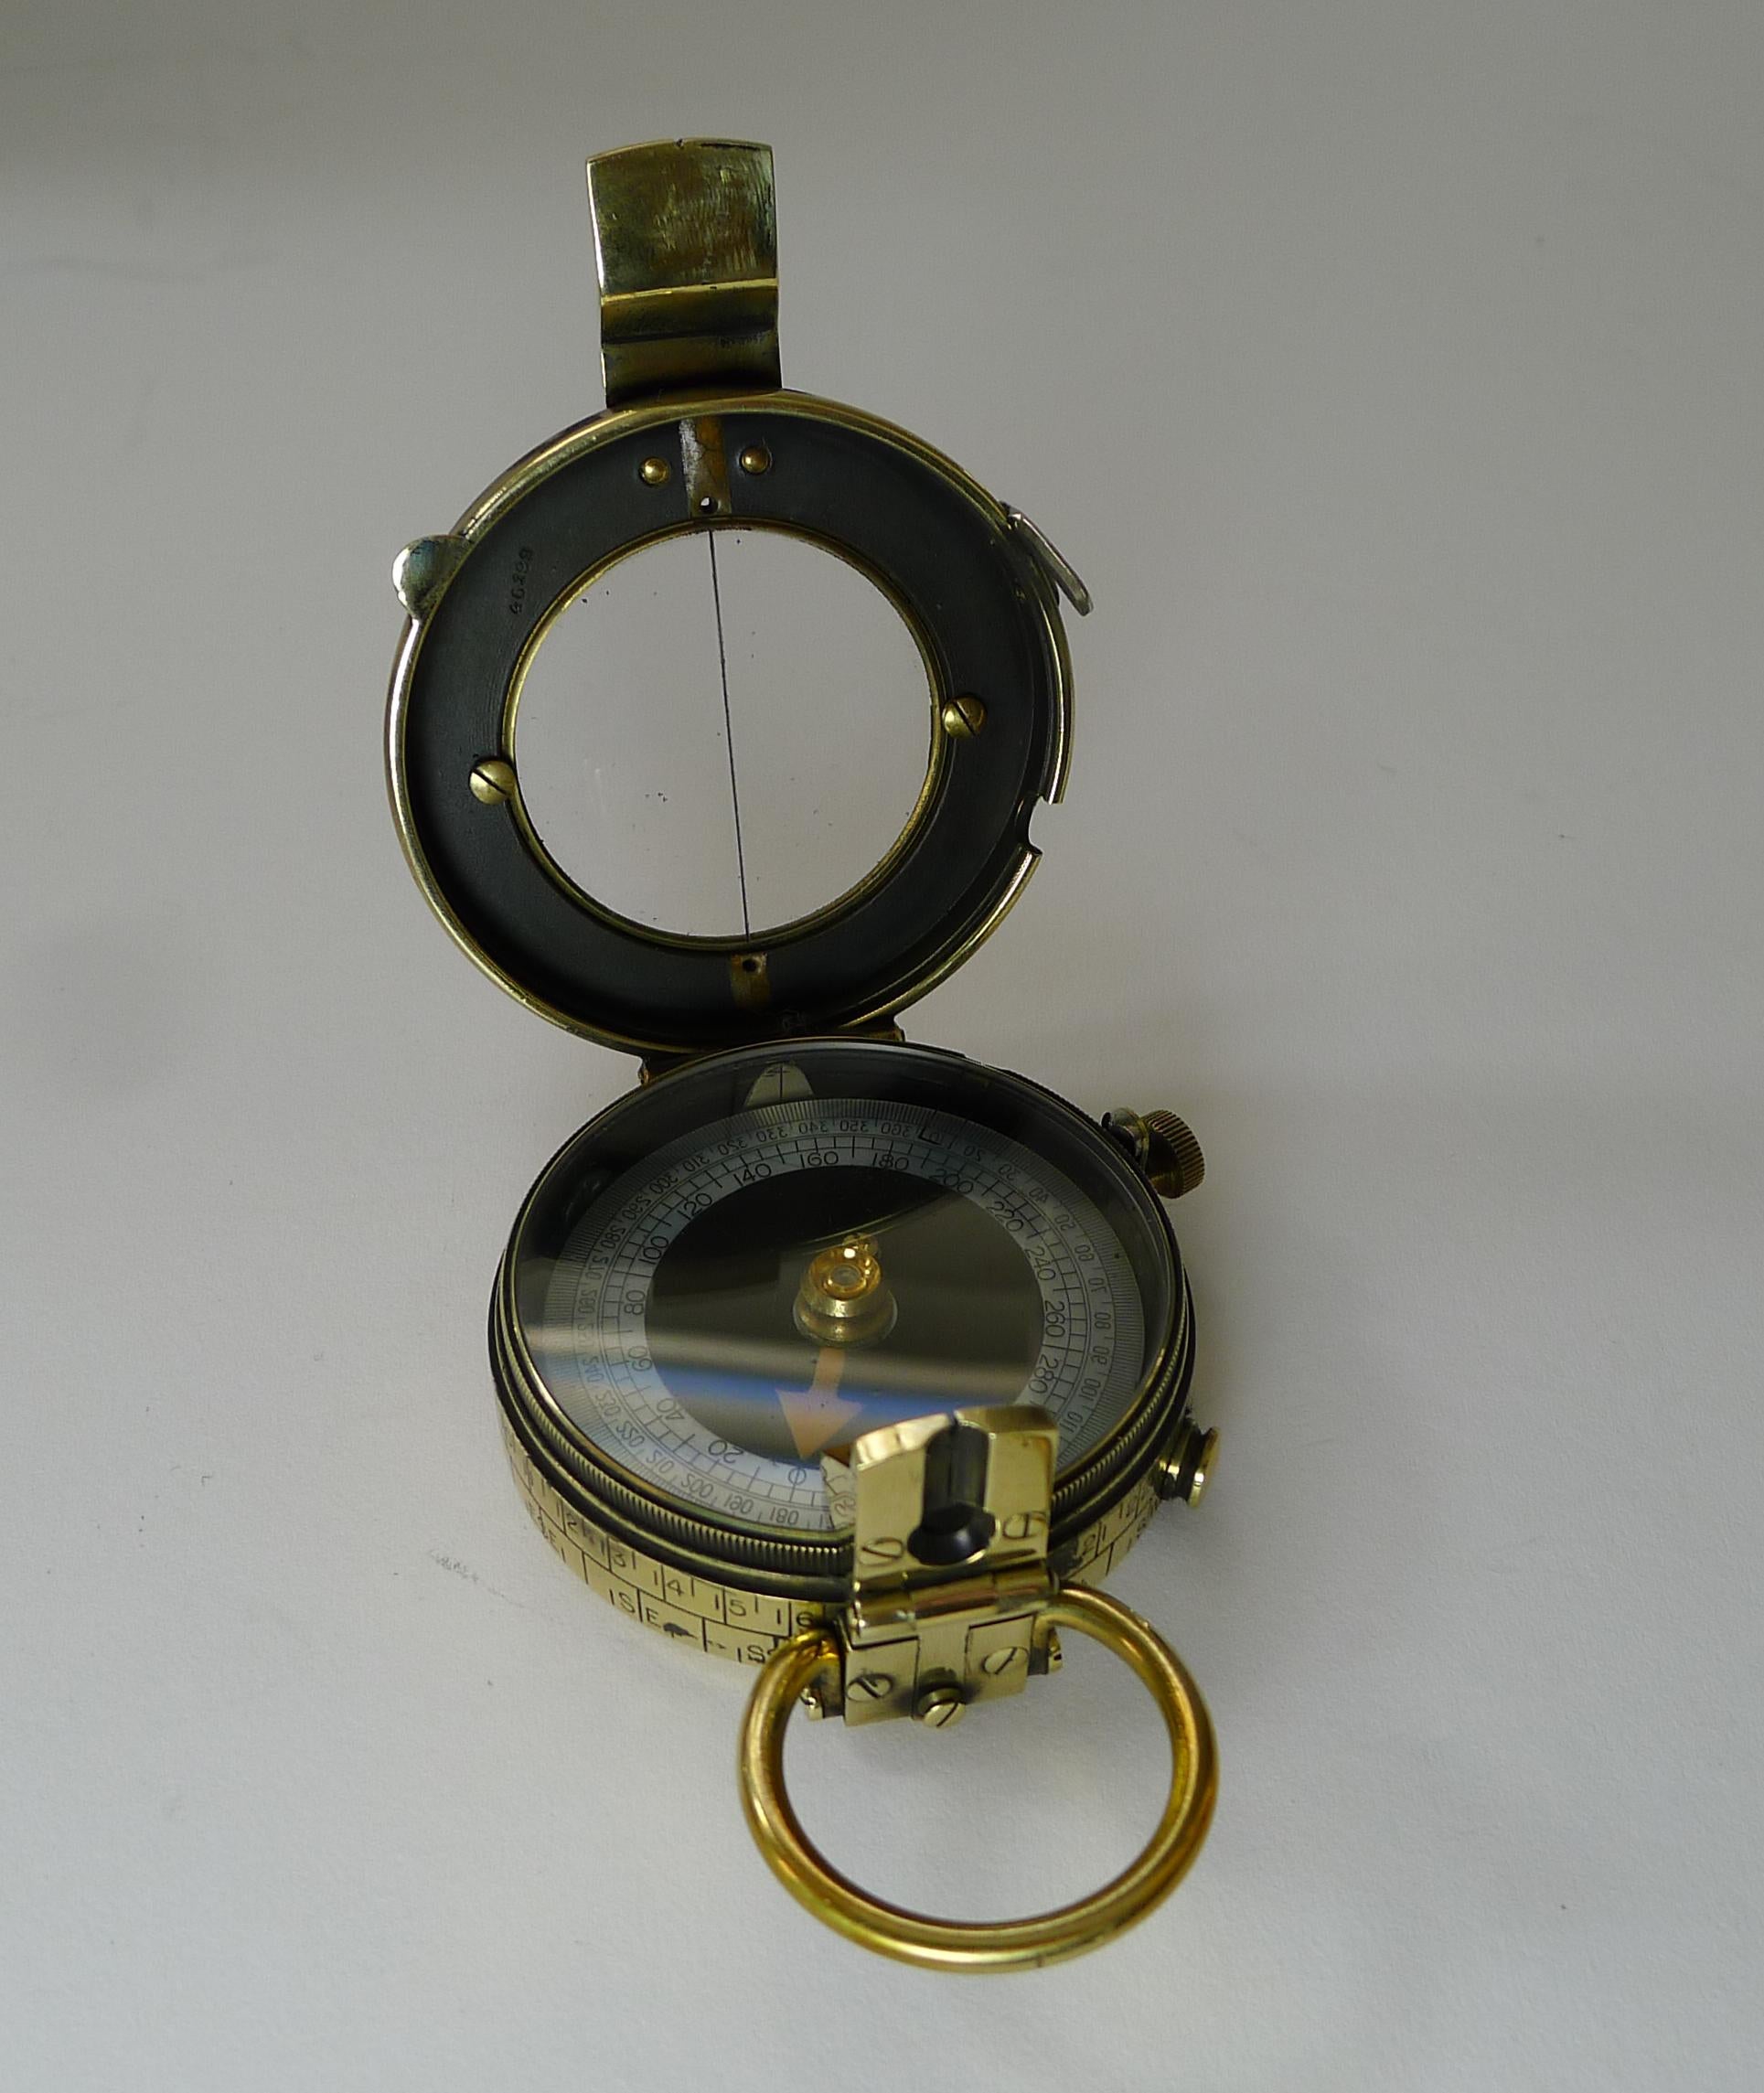 Early 20th Century WWI 1917 British Army Officer's Compass, Verner's Patent Mk viii by French Ltd